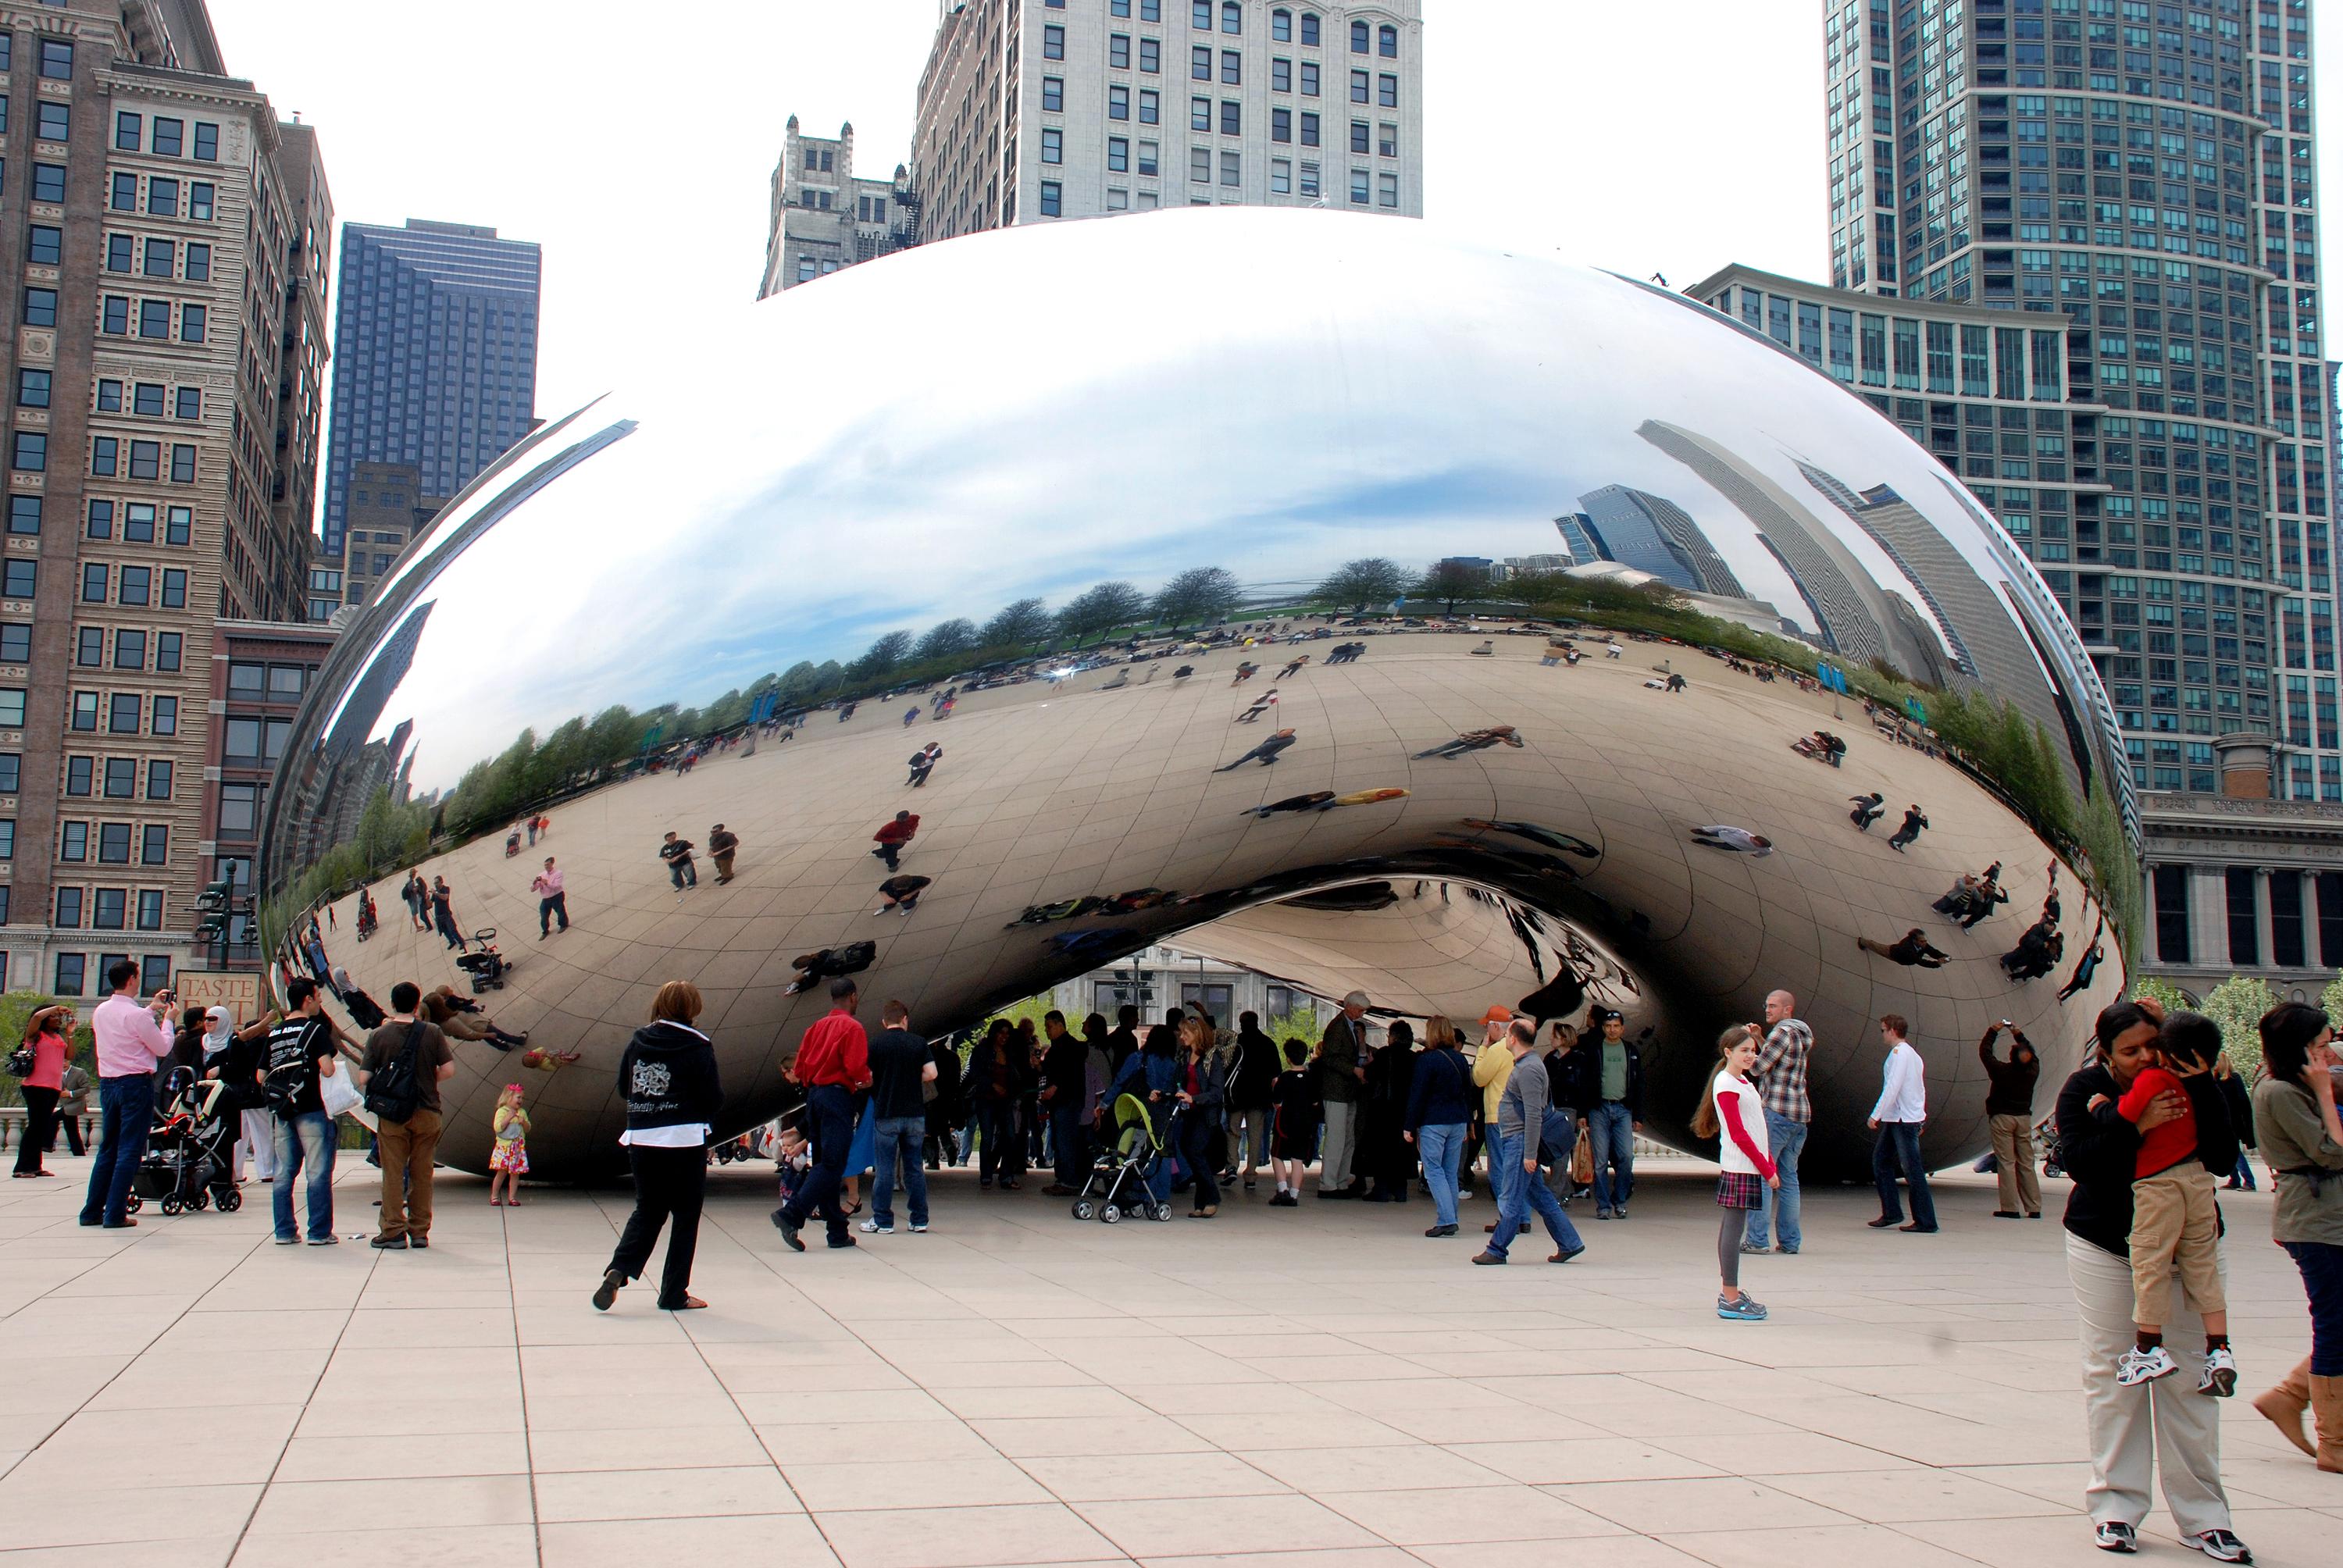 Chicago Marketing With a Book and Speech Summit July 30, 2021